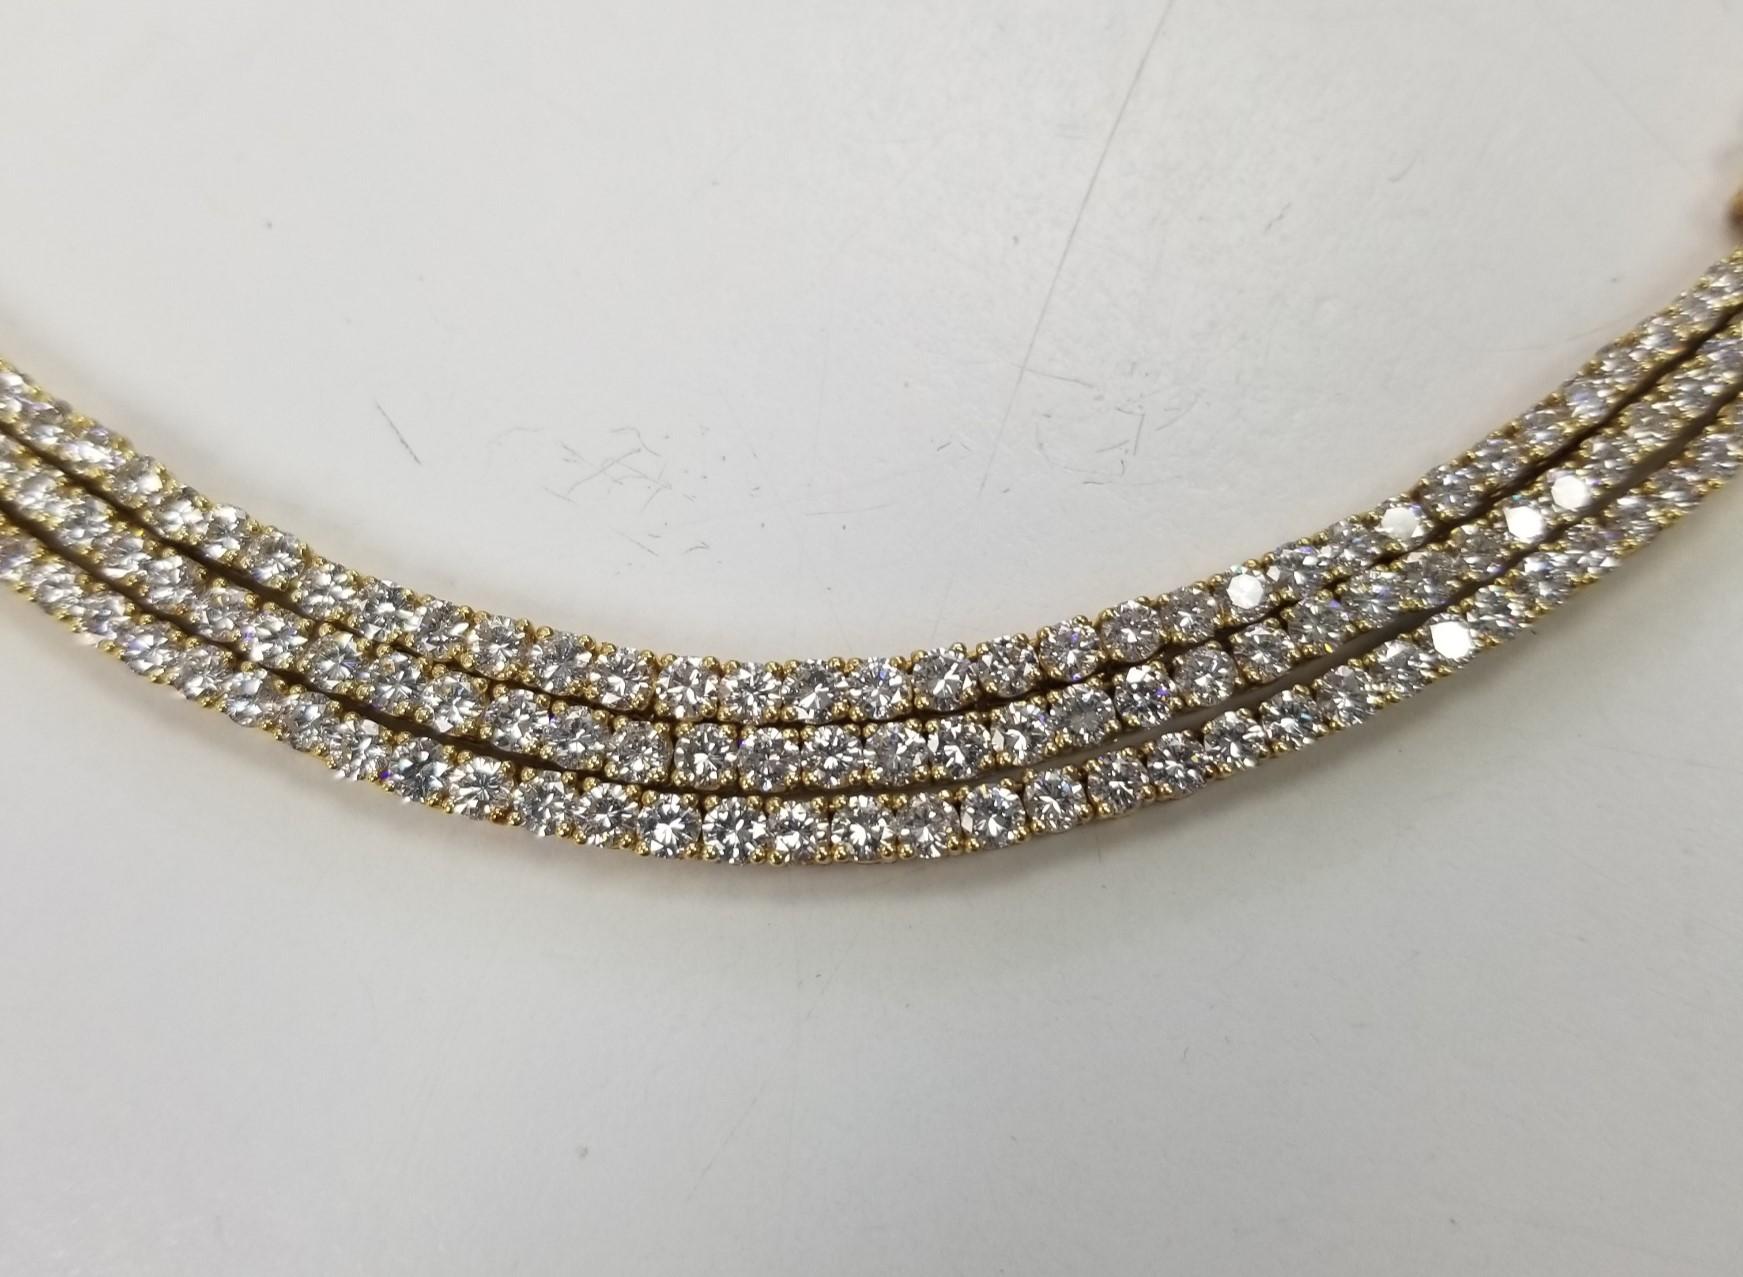 *Motivated to Sell – Please make a Fair Offer*
Specifications:
Metal: 18K Yellow Gold
Weight: 103.80 Gr
Main Stone: Round cut Diamonds
Carat Total Weight: 7.07 ctw
Color: E-F
Clarity: VS1-2
Length: 16.5 inch
Hallmark: 18K

